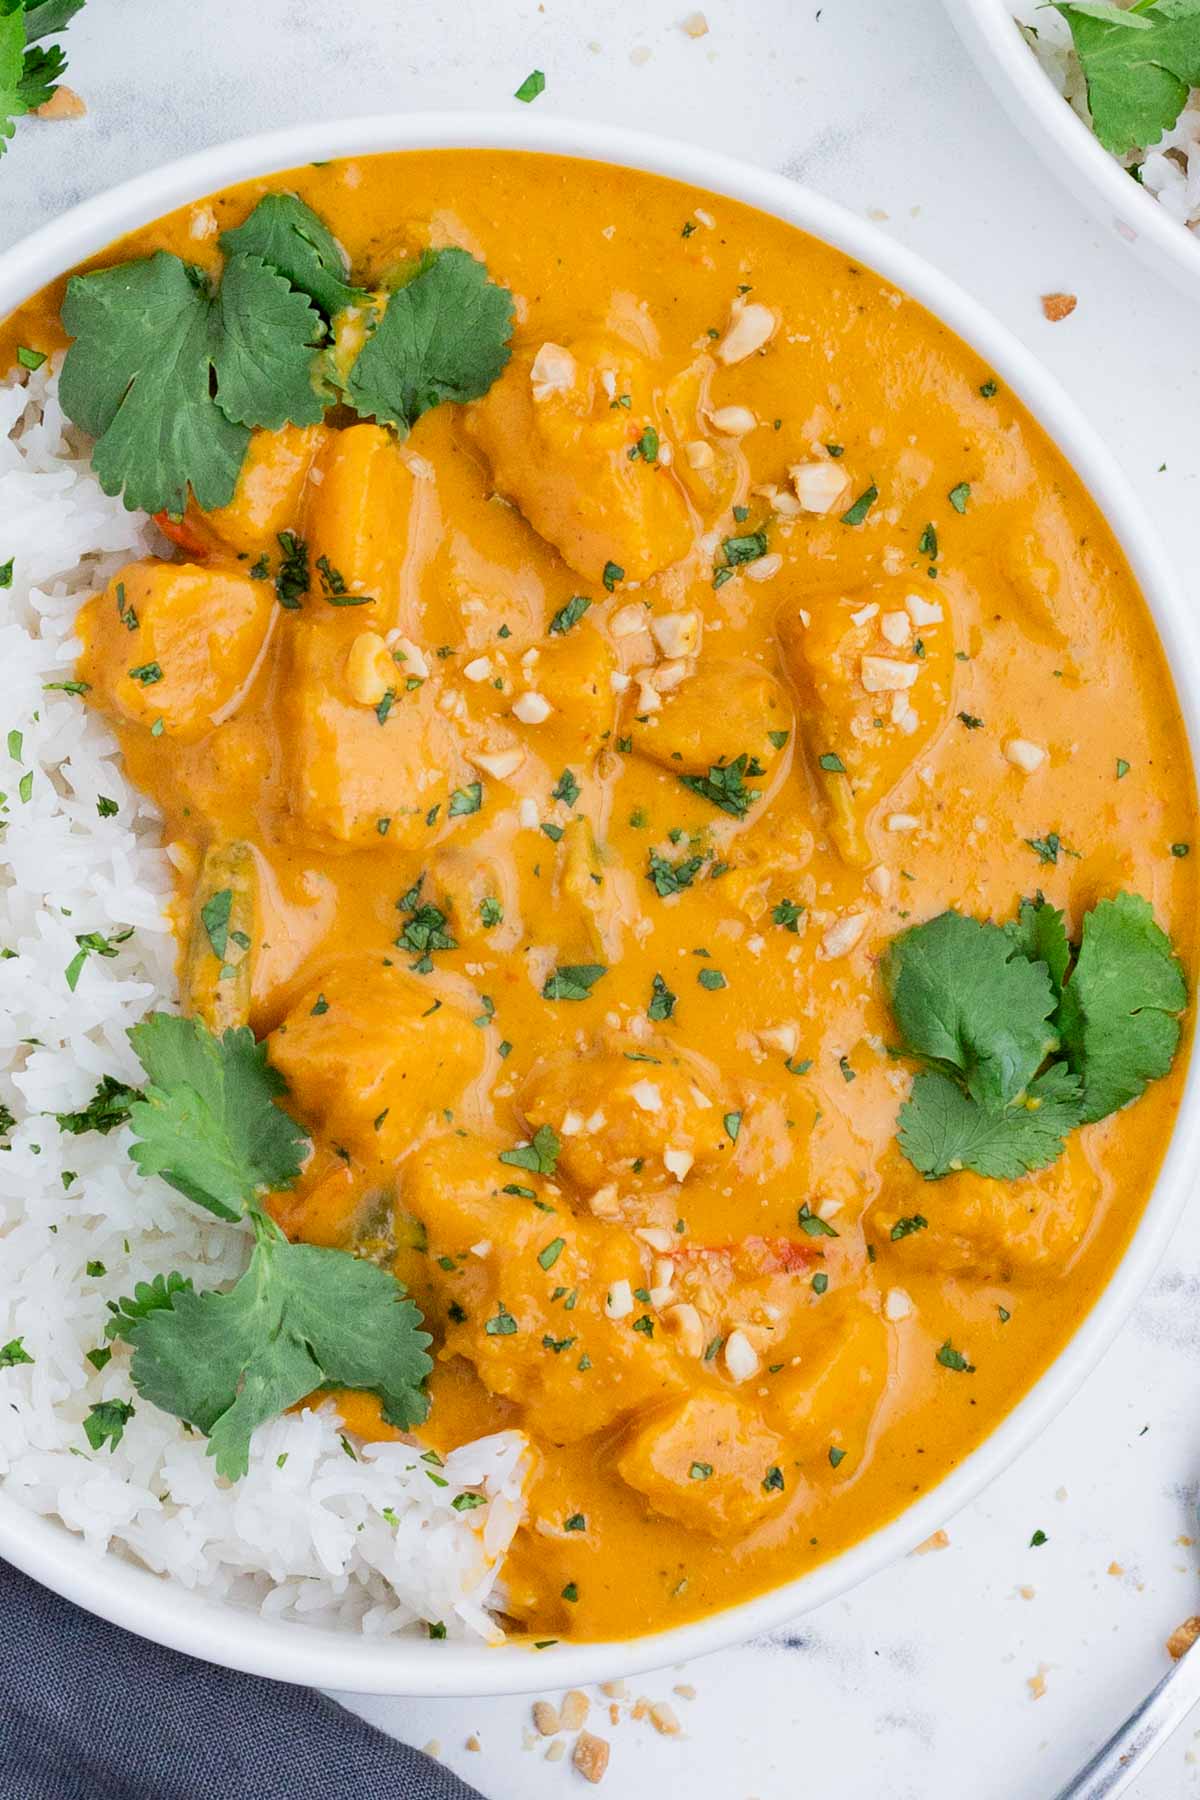 Pumpkin curry is served over rice in a white bowl.